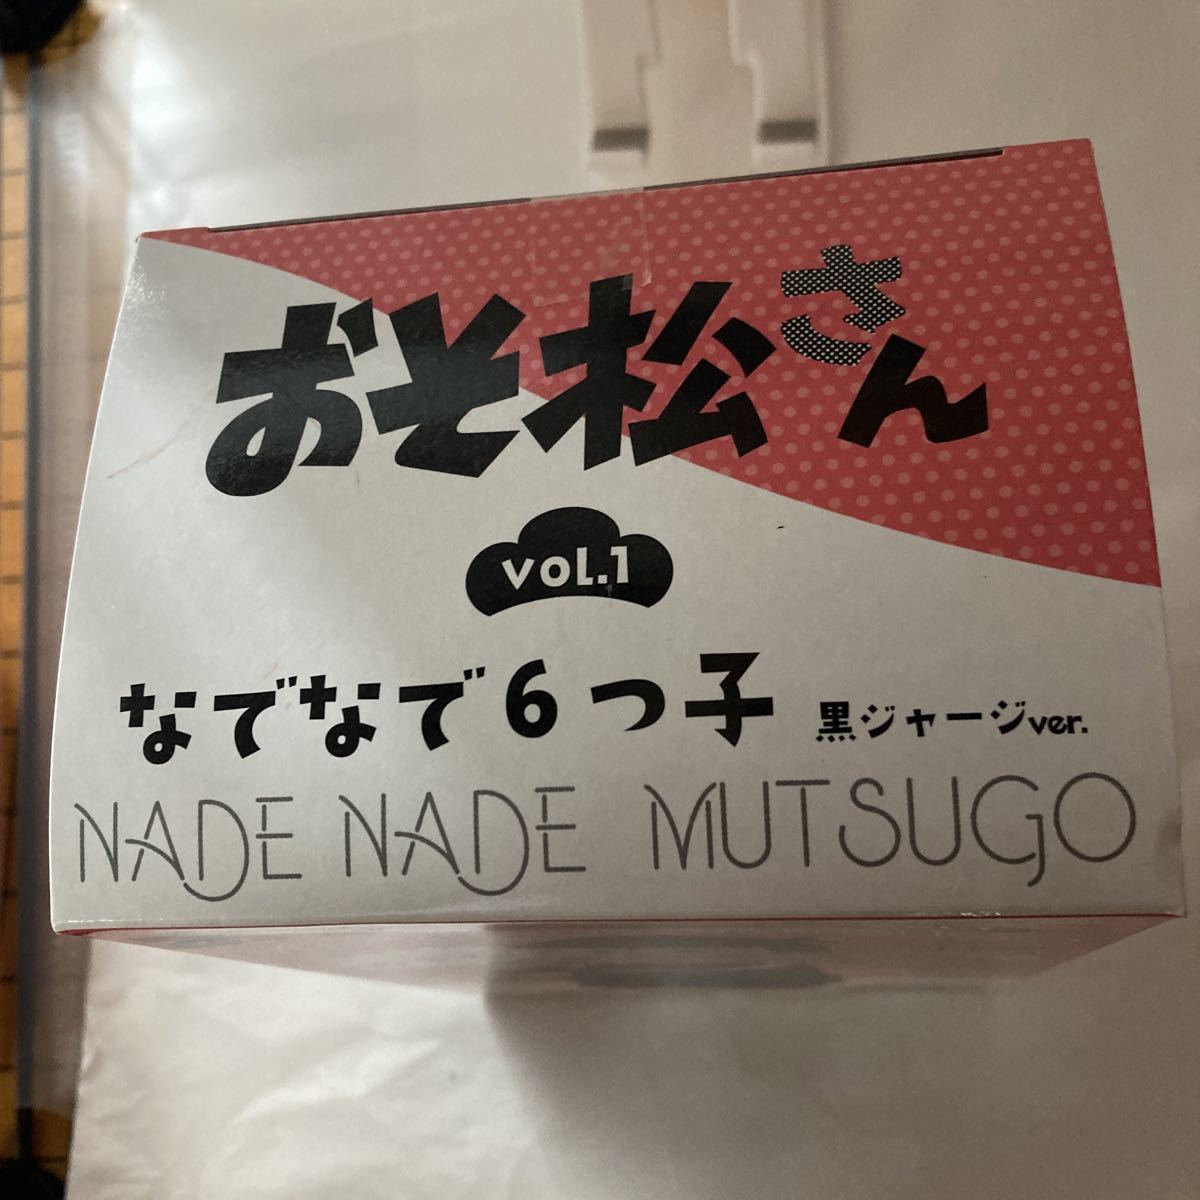  records out of production? unopened Mr. Osomatsu .. pine ....6..vol.1 black jersey verei Beck s* Picture z(avex pictures)